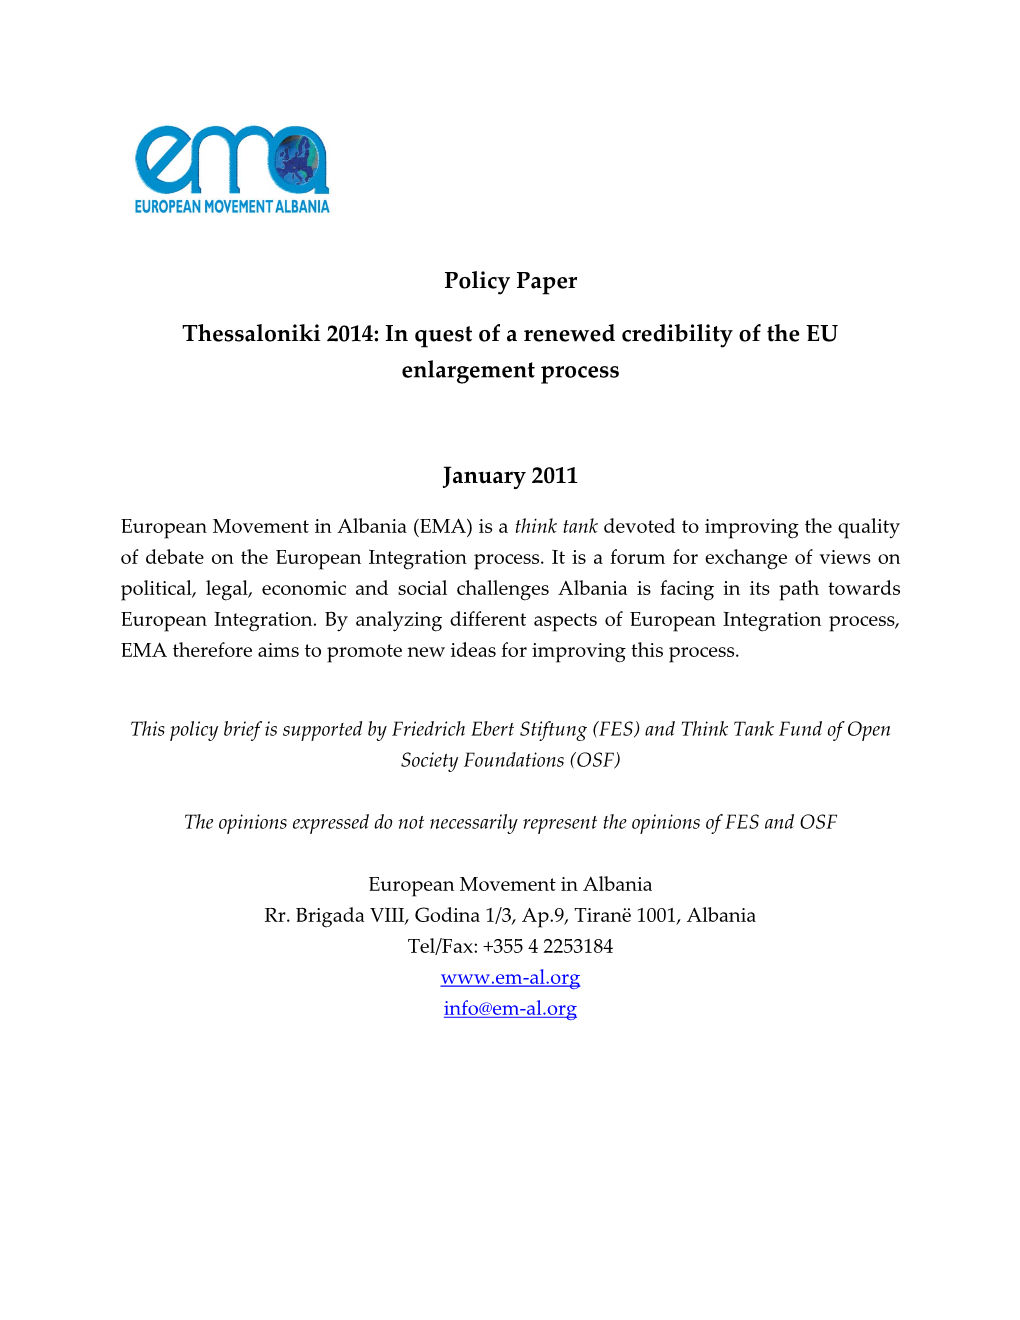 Policy Paper Thessaloniki 2014: in Quest of a Renewed Credibility of the EU Enlargement Process January 2011